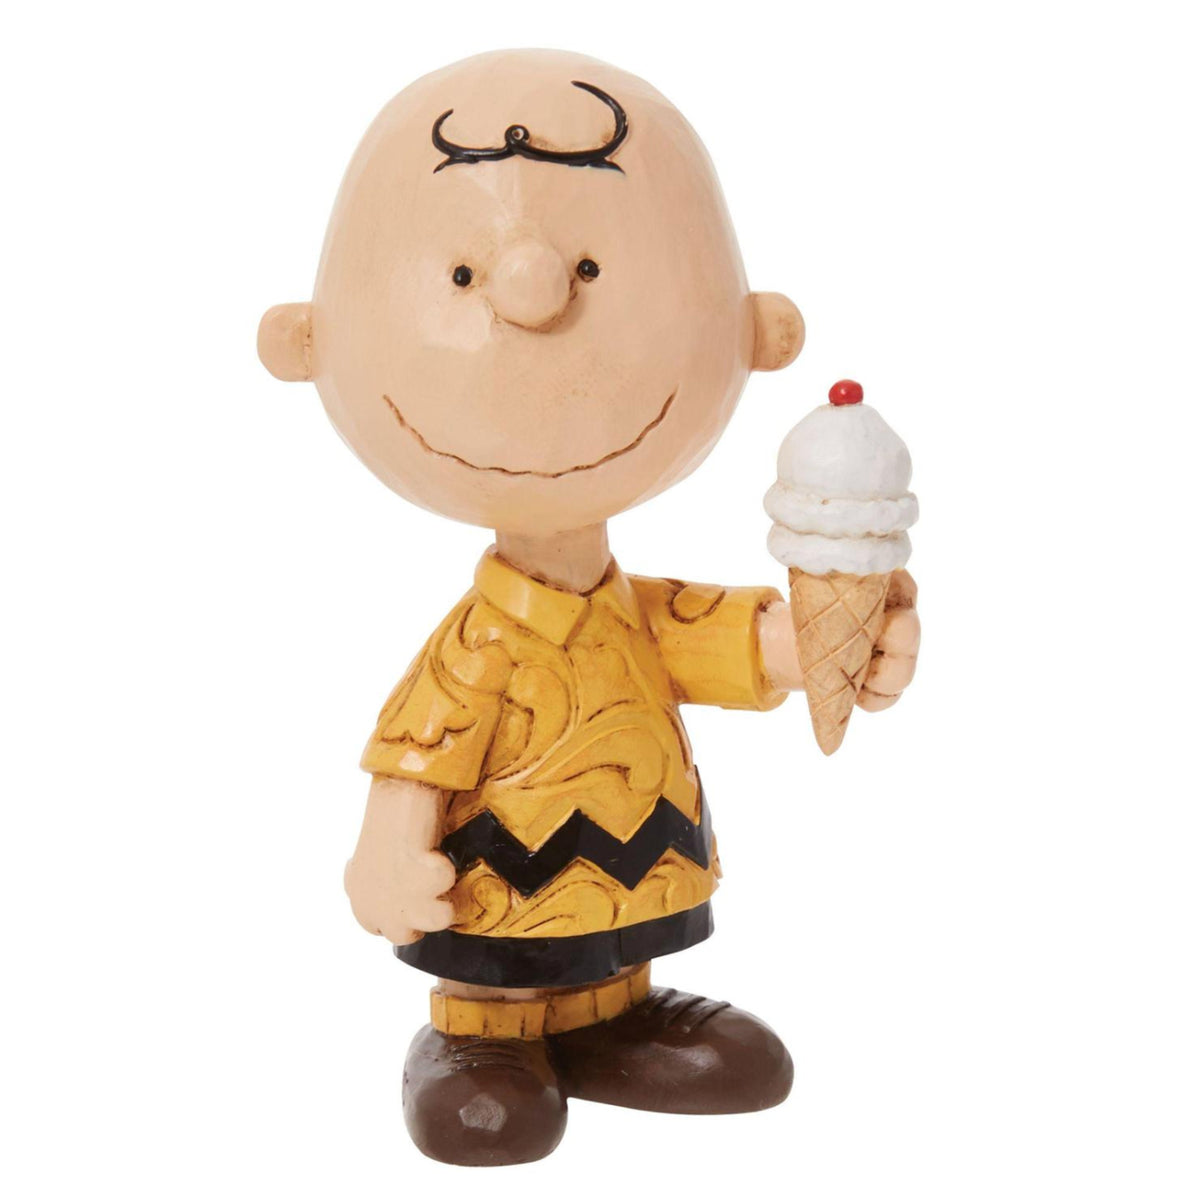 Jim Shore - Peanuts Charlie Brown with Ice Cream